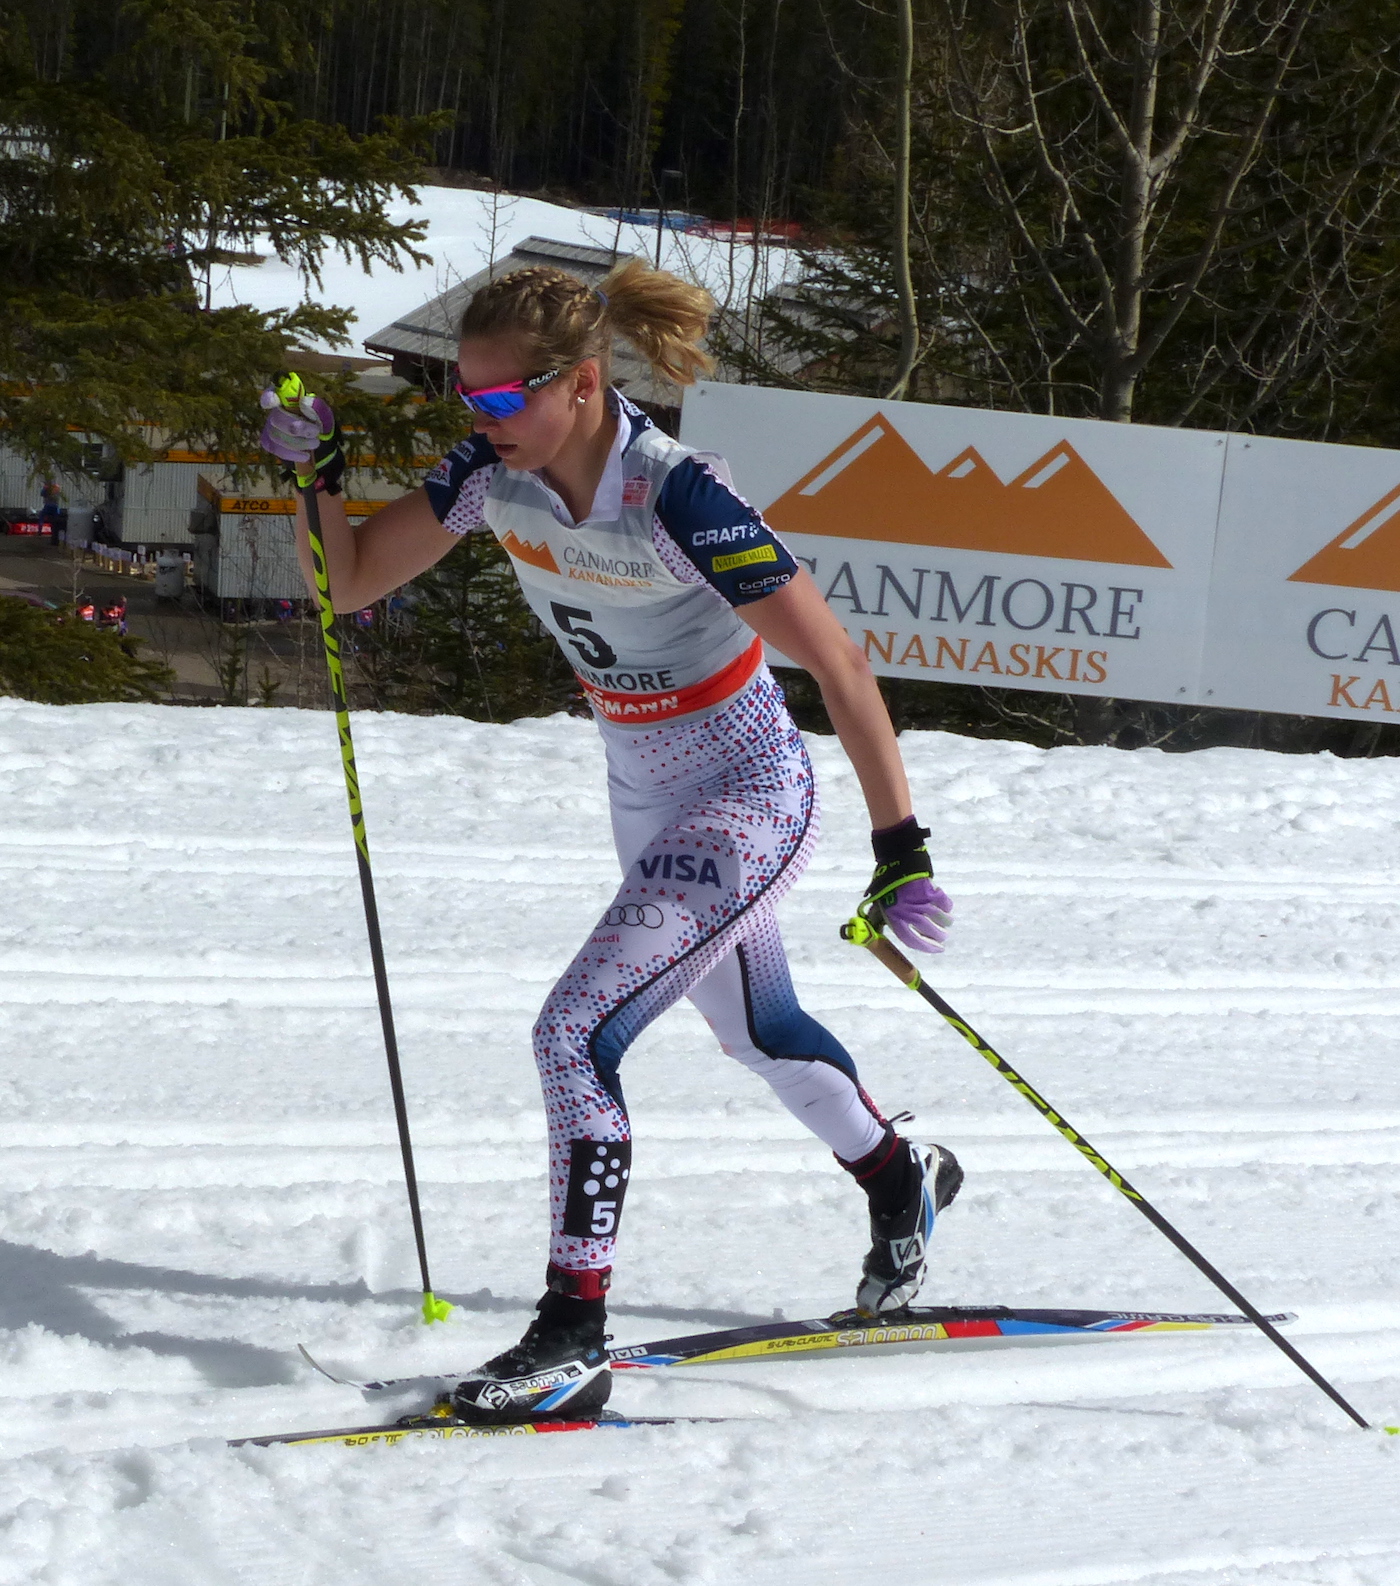 Fifth in Tour, Diggins Cements Her Status as a Leader, Prefers Being Considered a Cheerleader